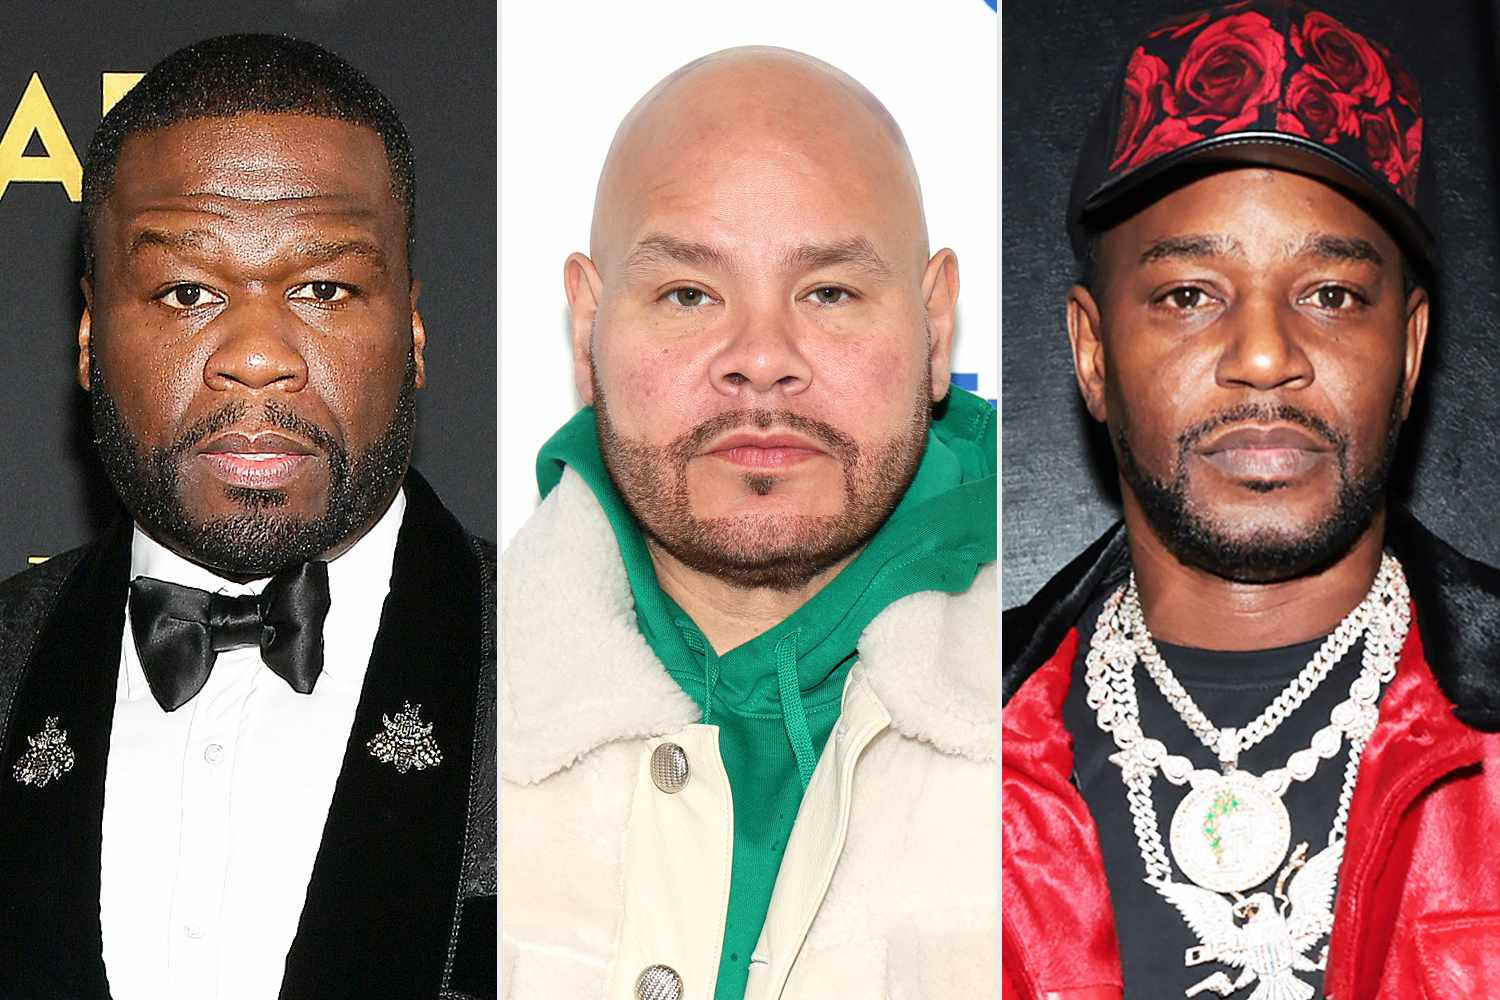 50 Cent Says He 'Wasted Too Much Time' Beefing with Fat Joe and Cam'ron: 'It Was Just the Competitive Nature'